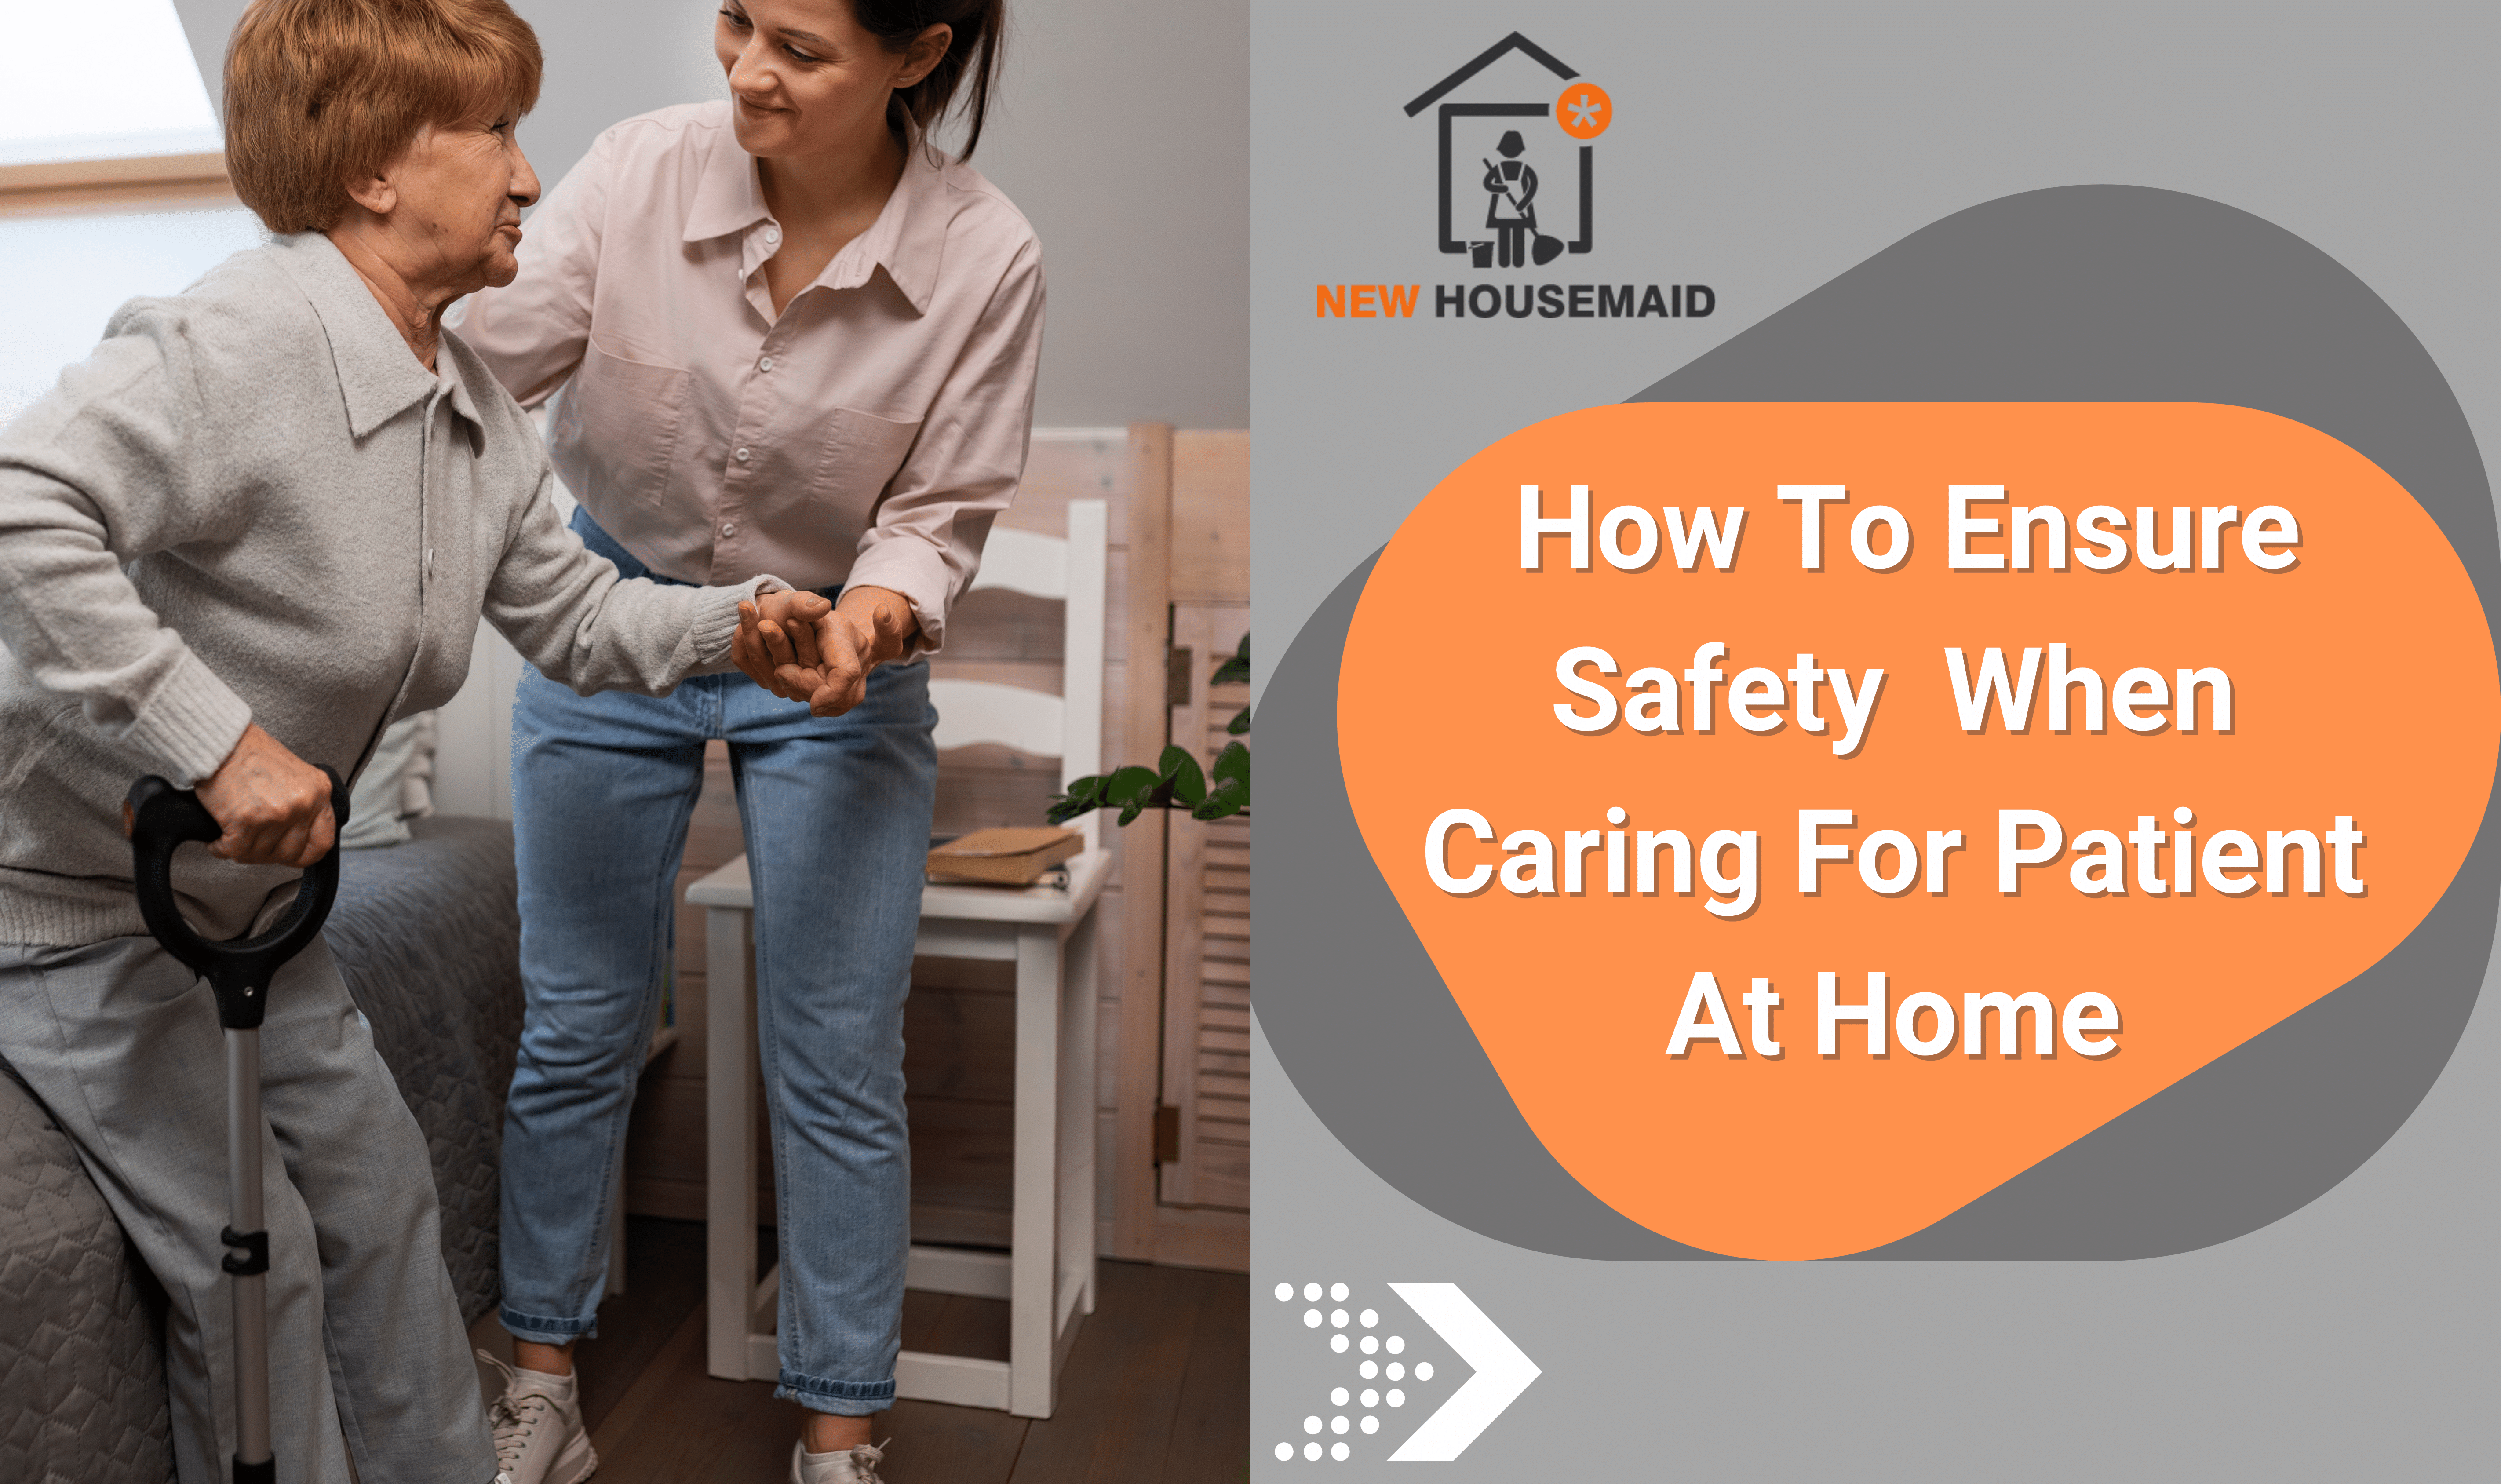 How to Ensure Safety When Caring for Patient at Home